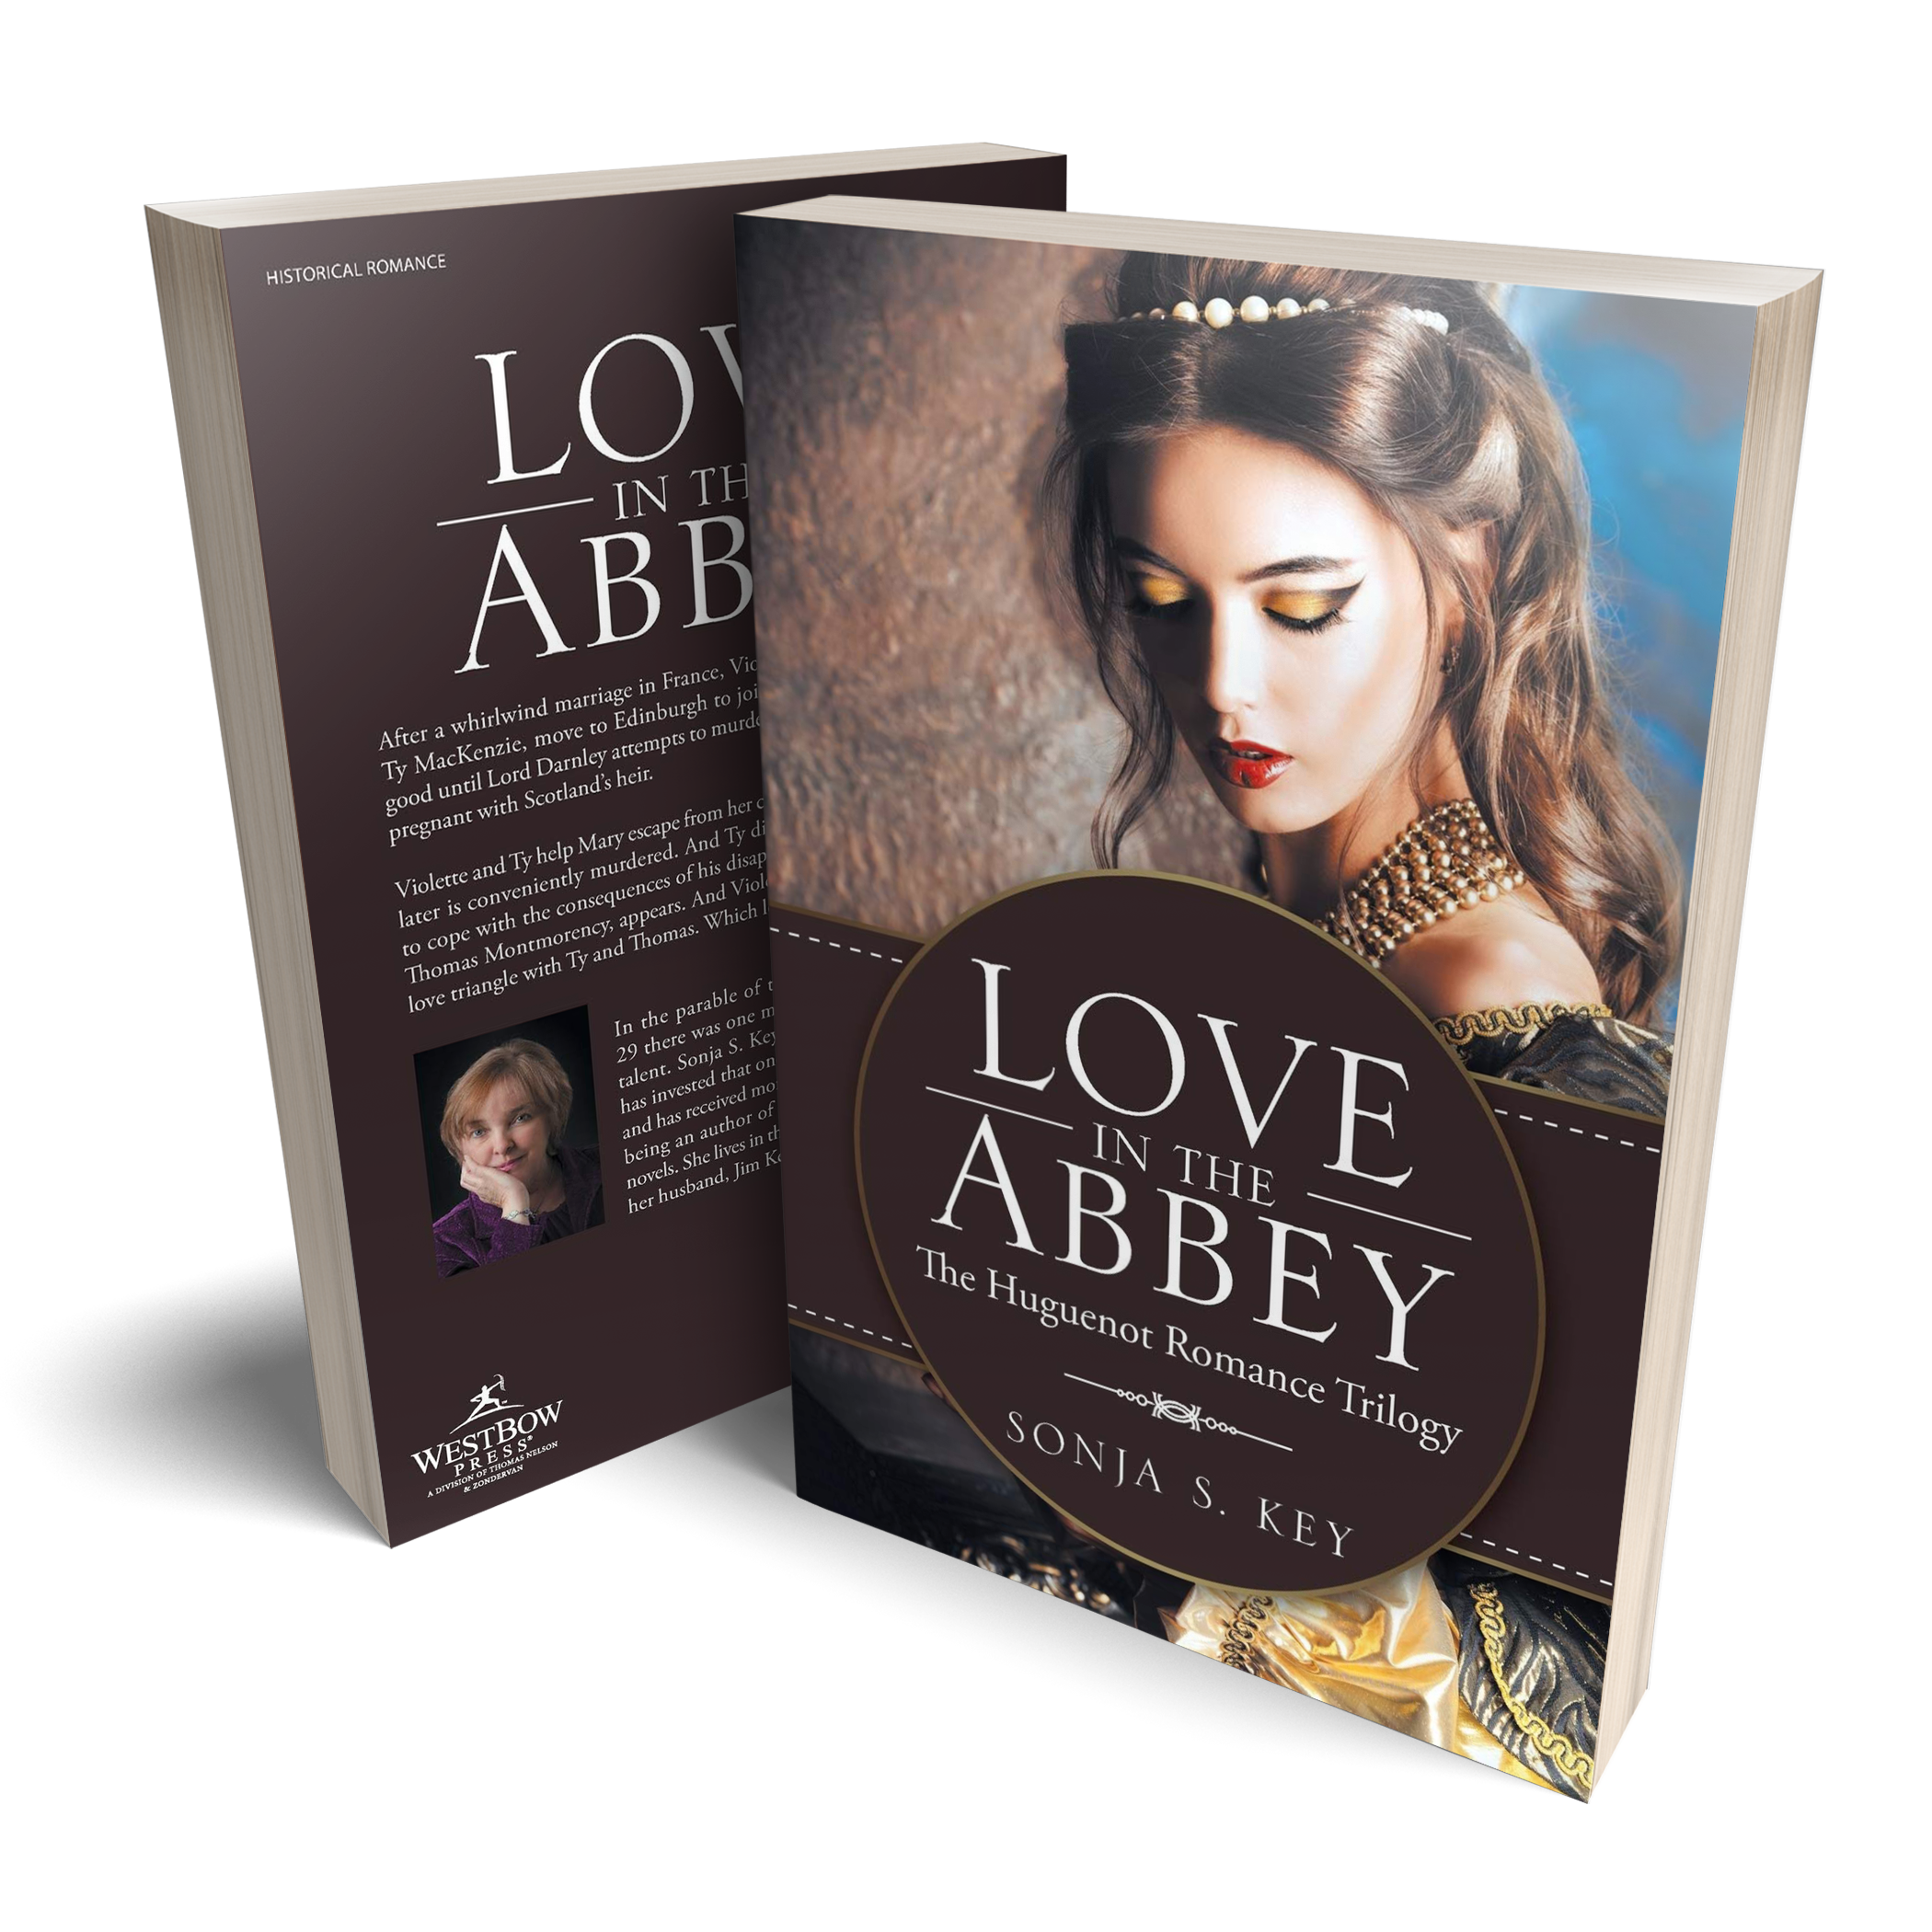 Sonja S. Key's “Love in the Abbey” is a Compelling Novel that Shows the  Power and Prowess of a Queen